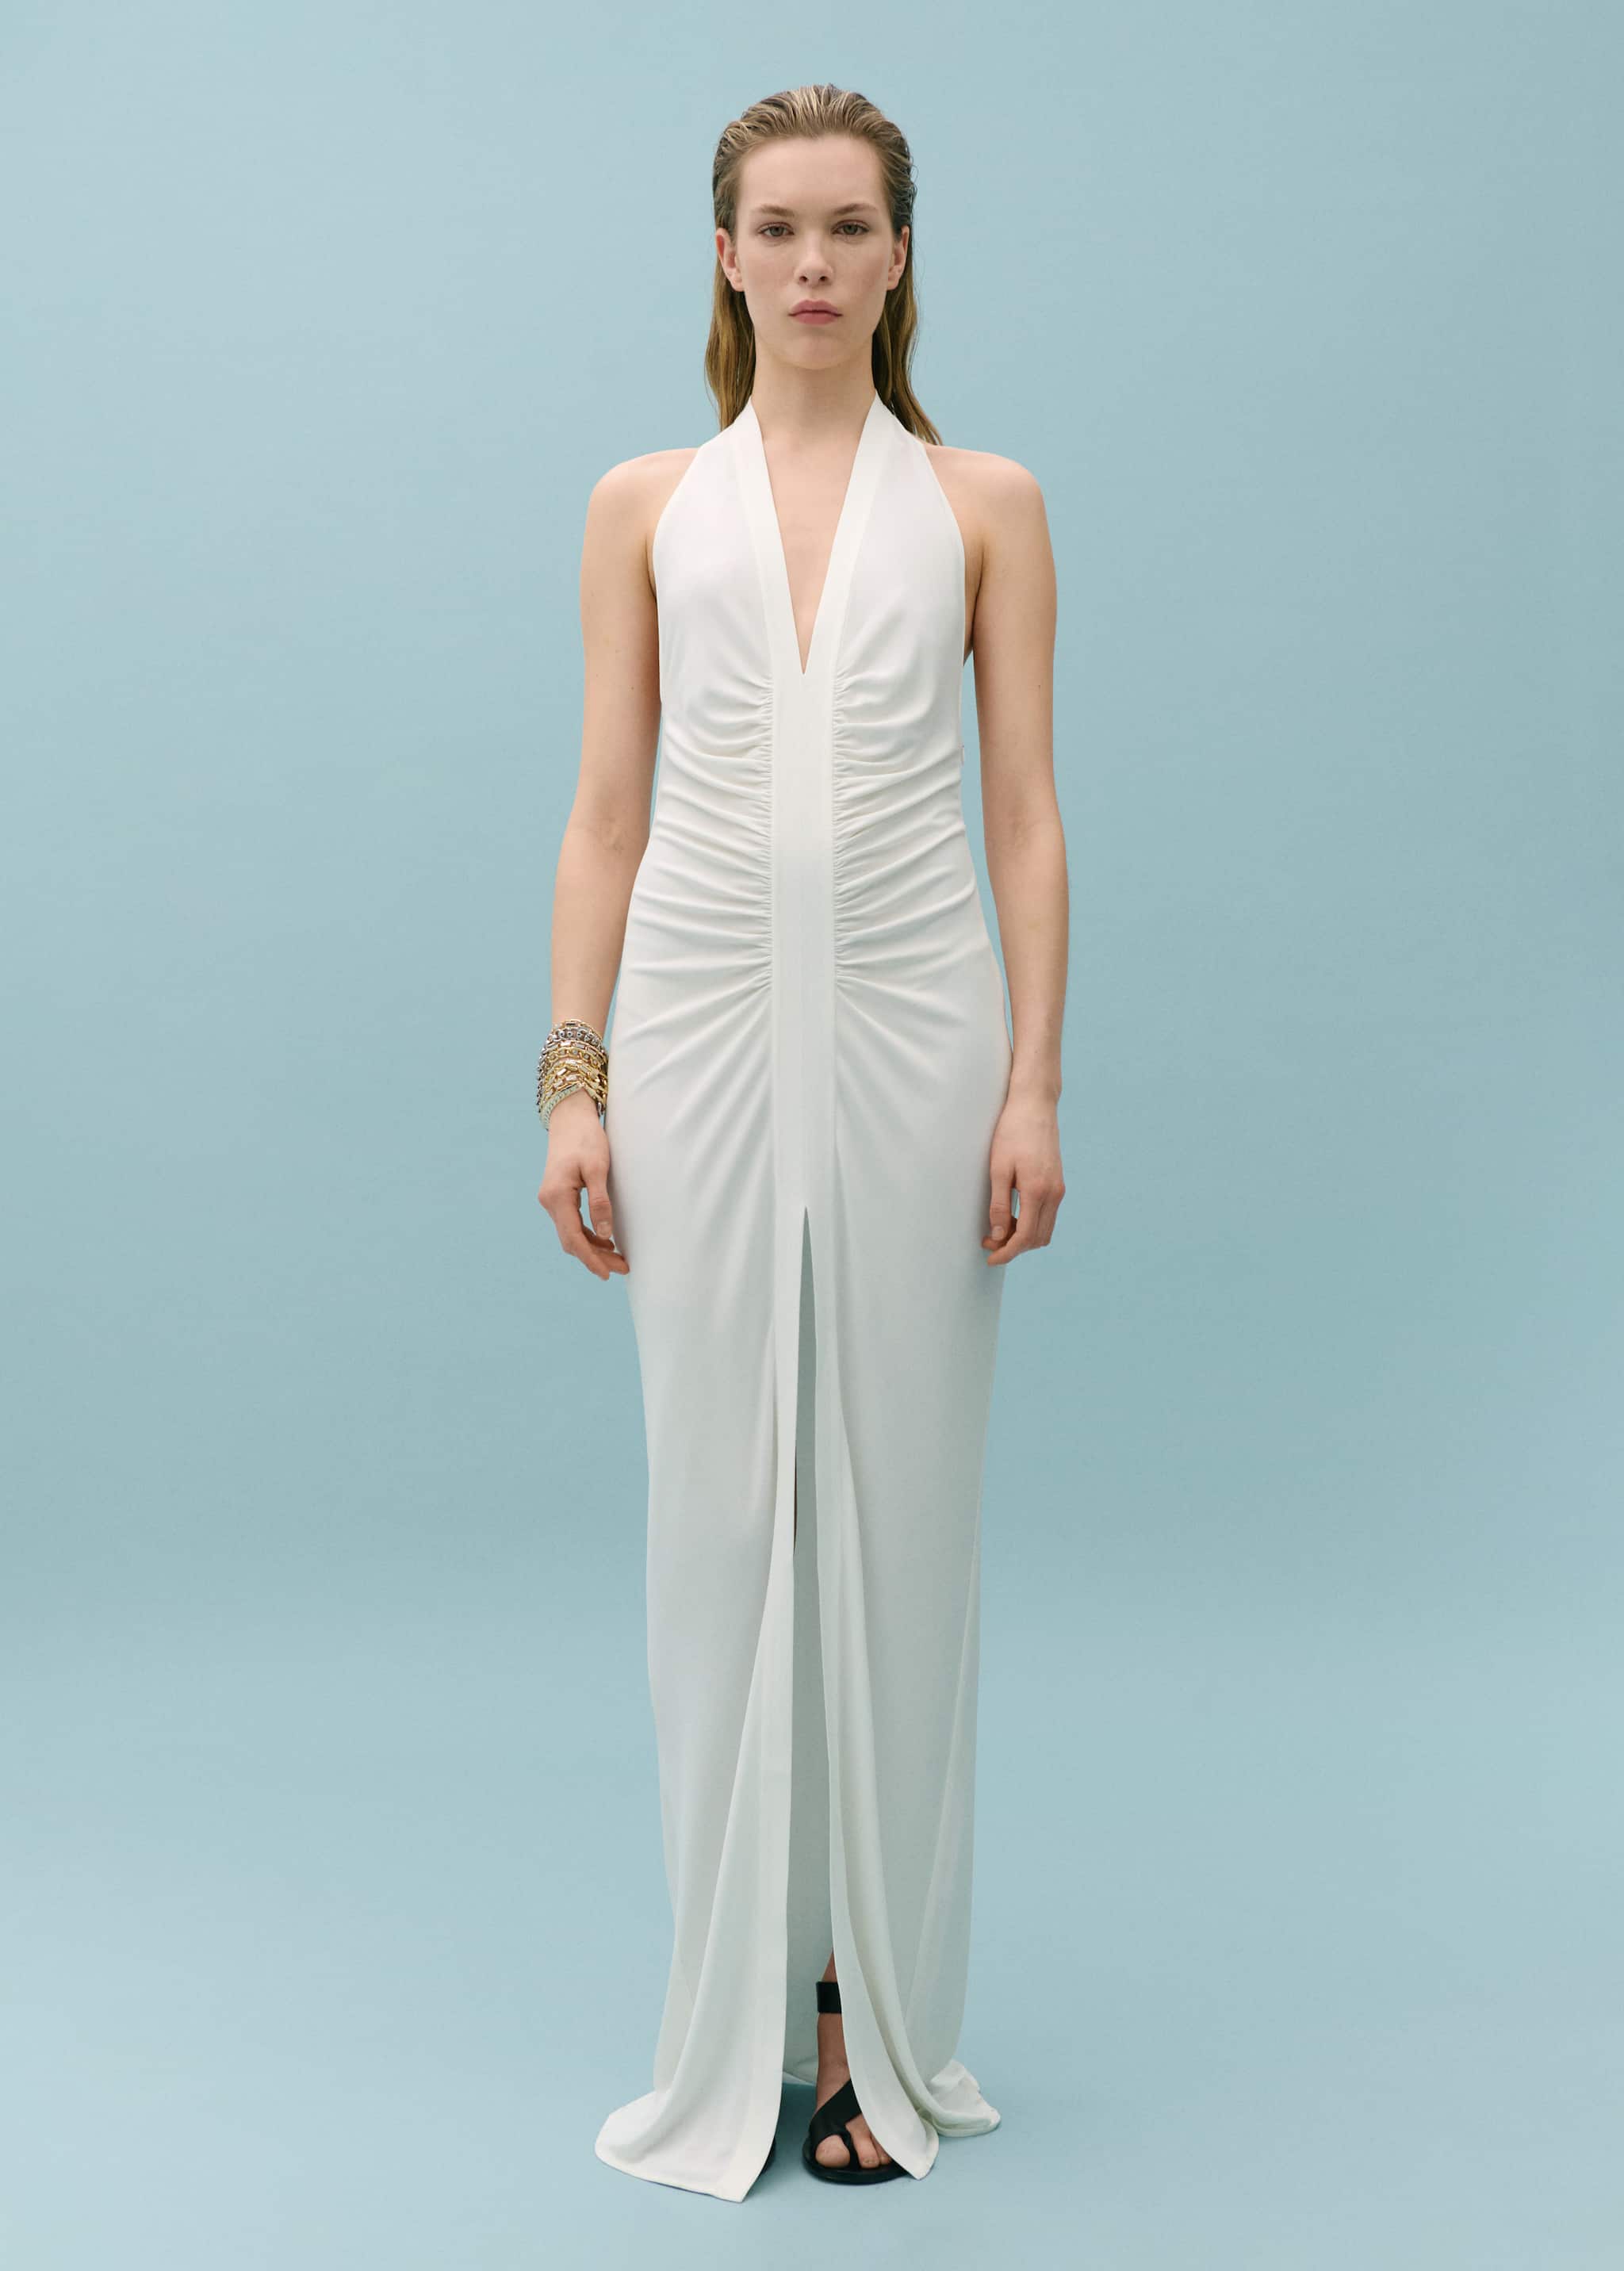 Draped halter dress with opening - General plane